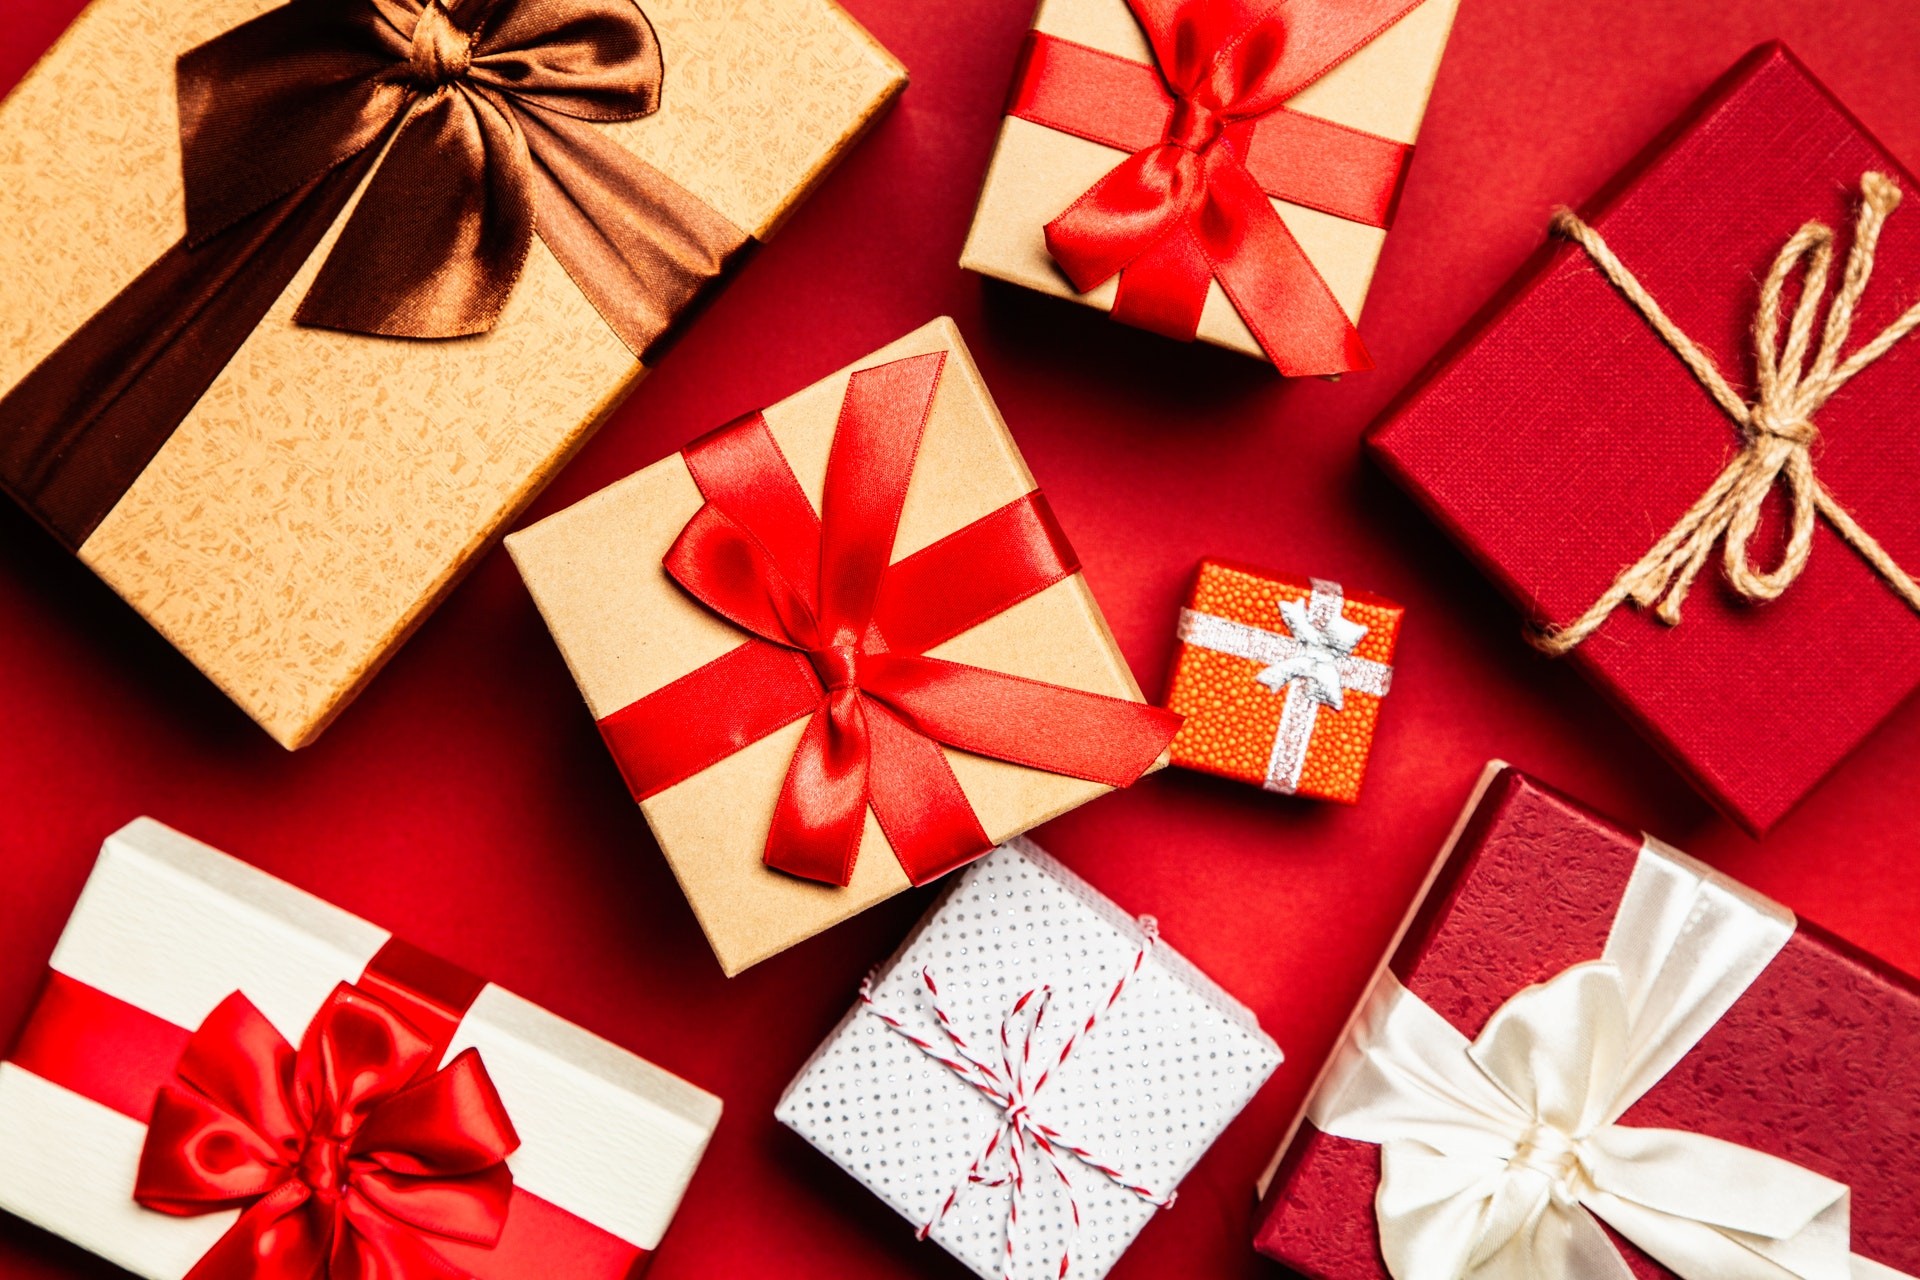 Best Connected Christmas Gifts from TP-Link, Vaio & More